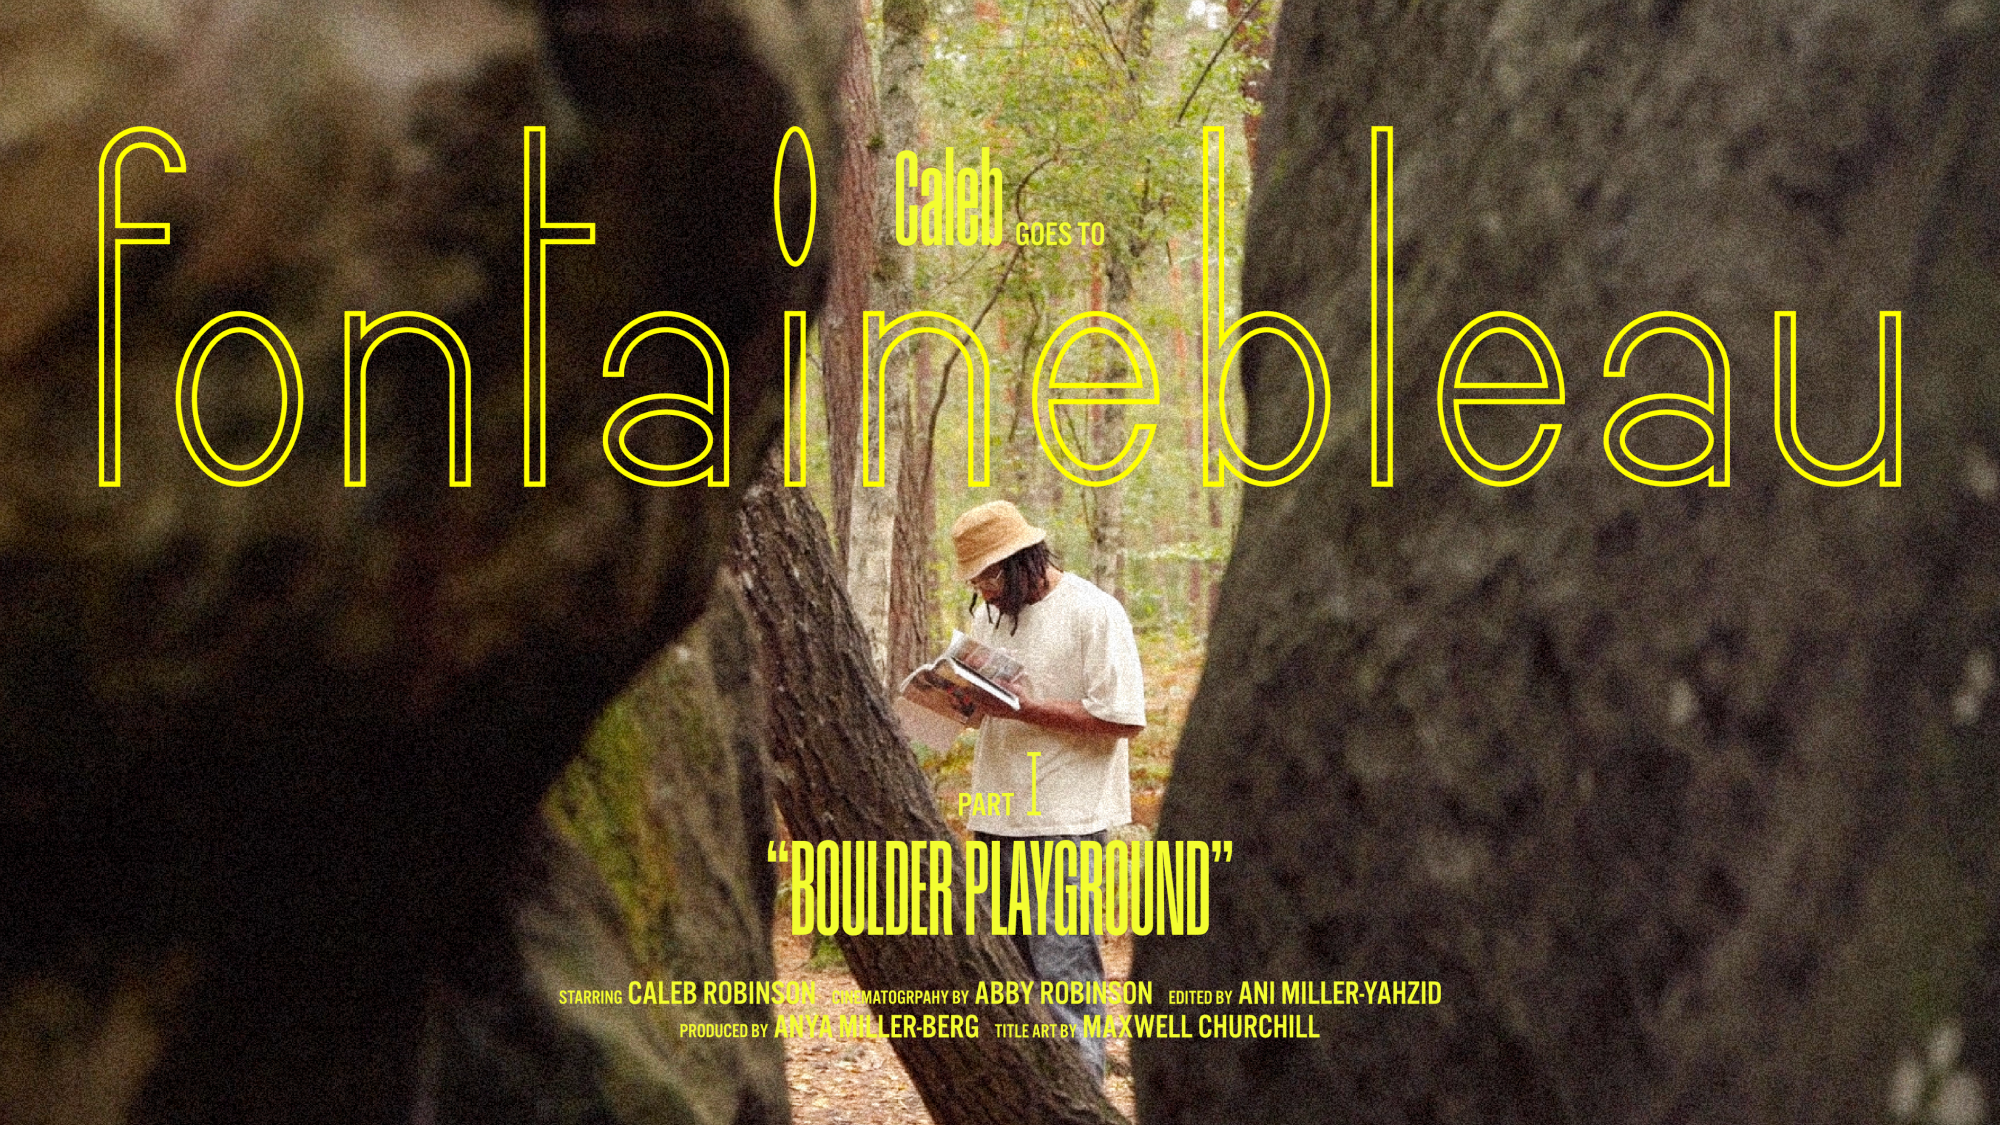 Caleb goes to Fontainebleau Pt 1. "Boulder Playground"